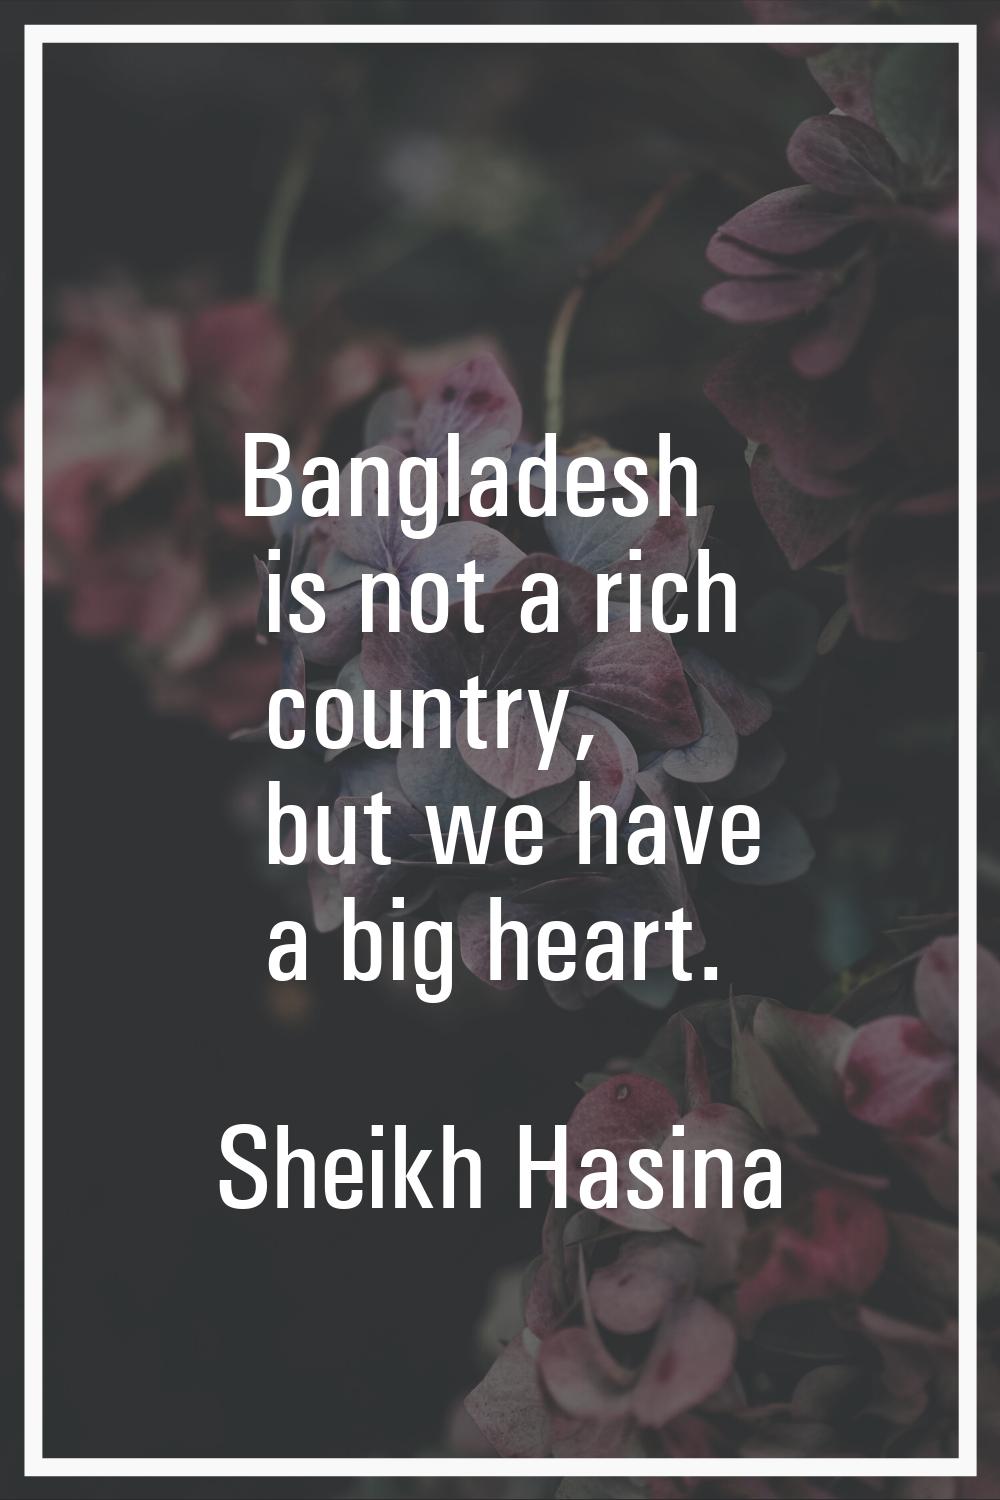 Bangladesh is not a rich country, but we have a big heart.